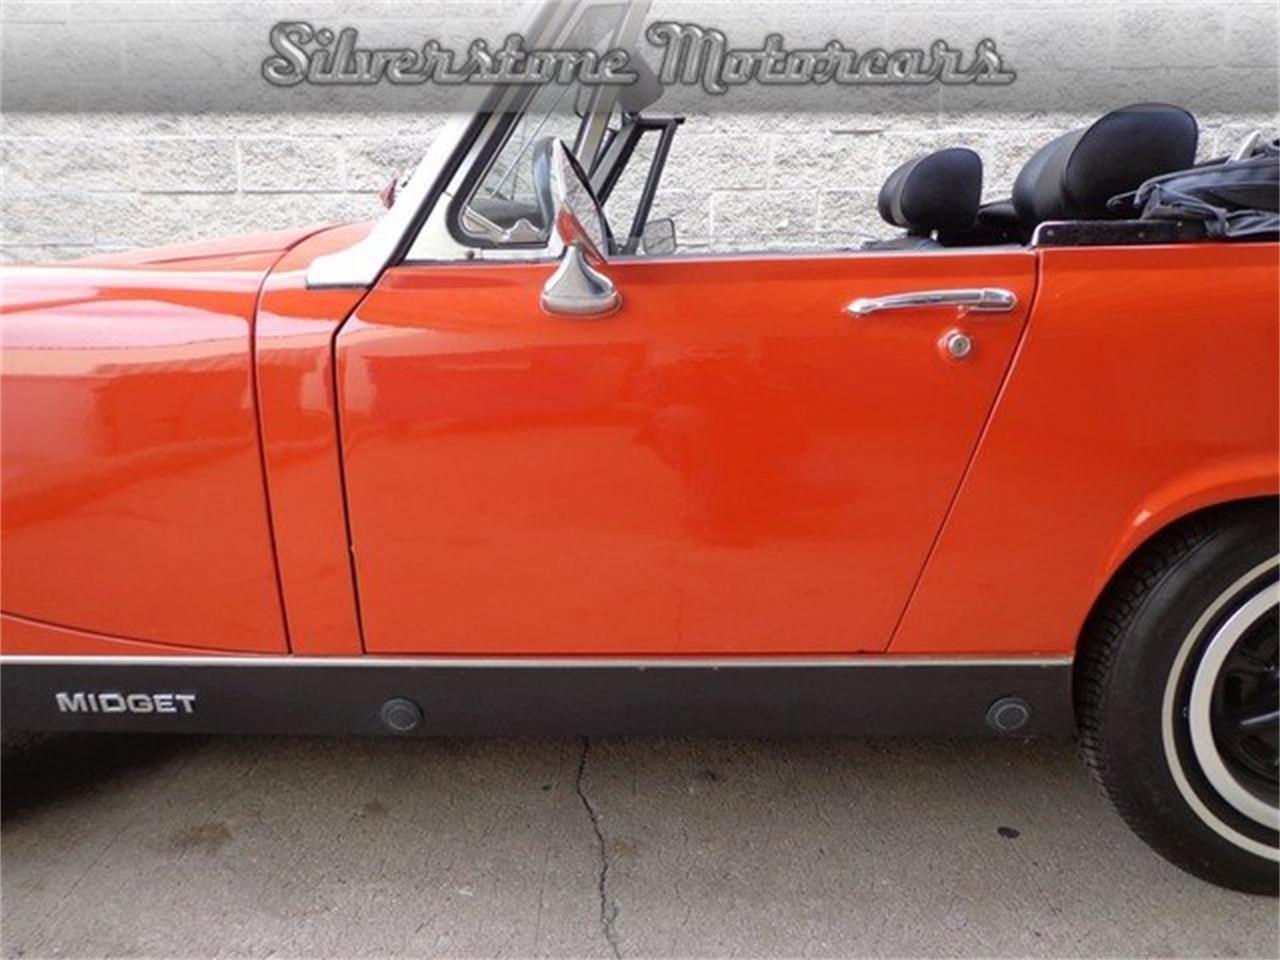 1976 MG Midget for sale in North Andover, MA – photo 29